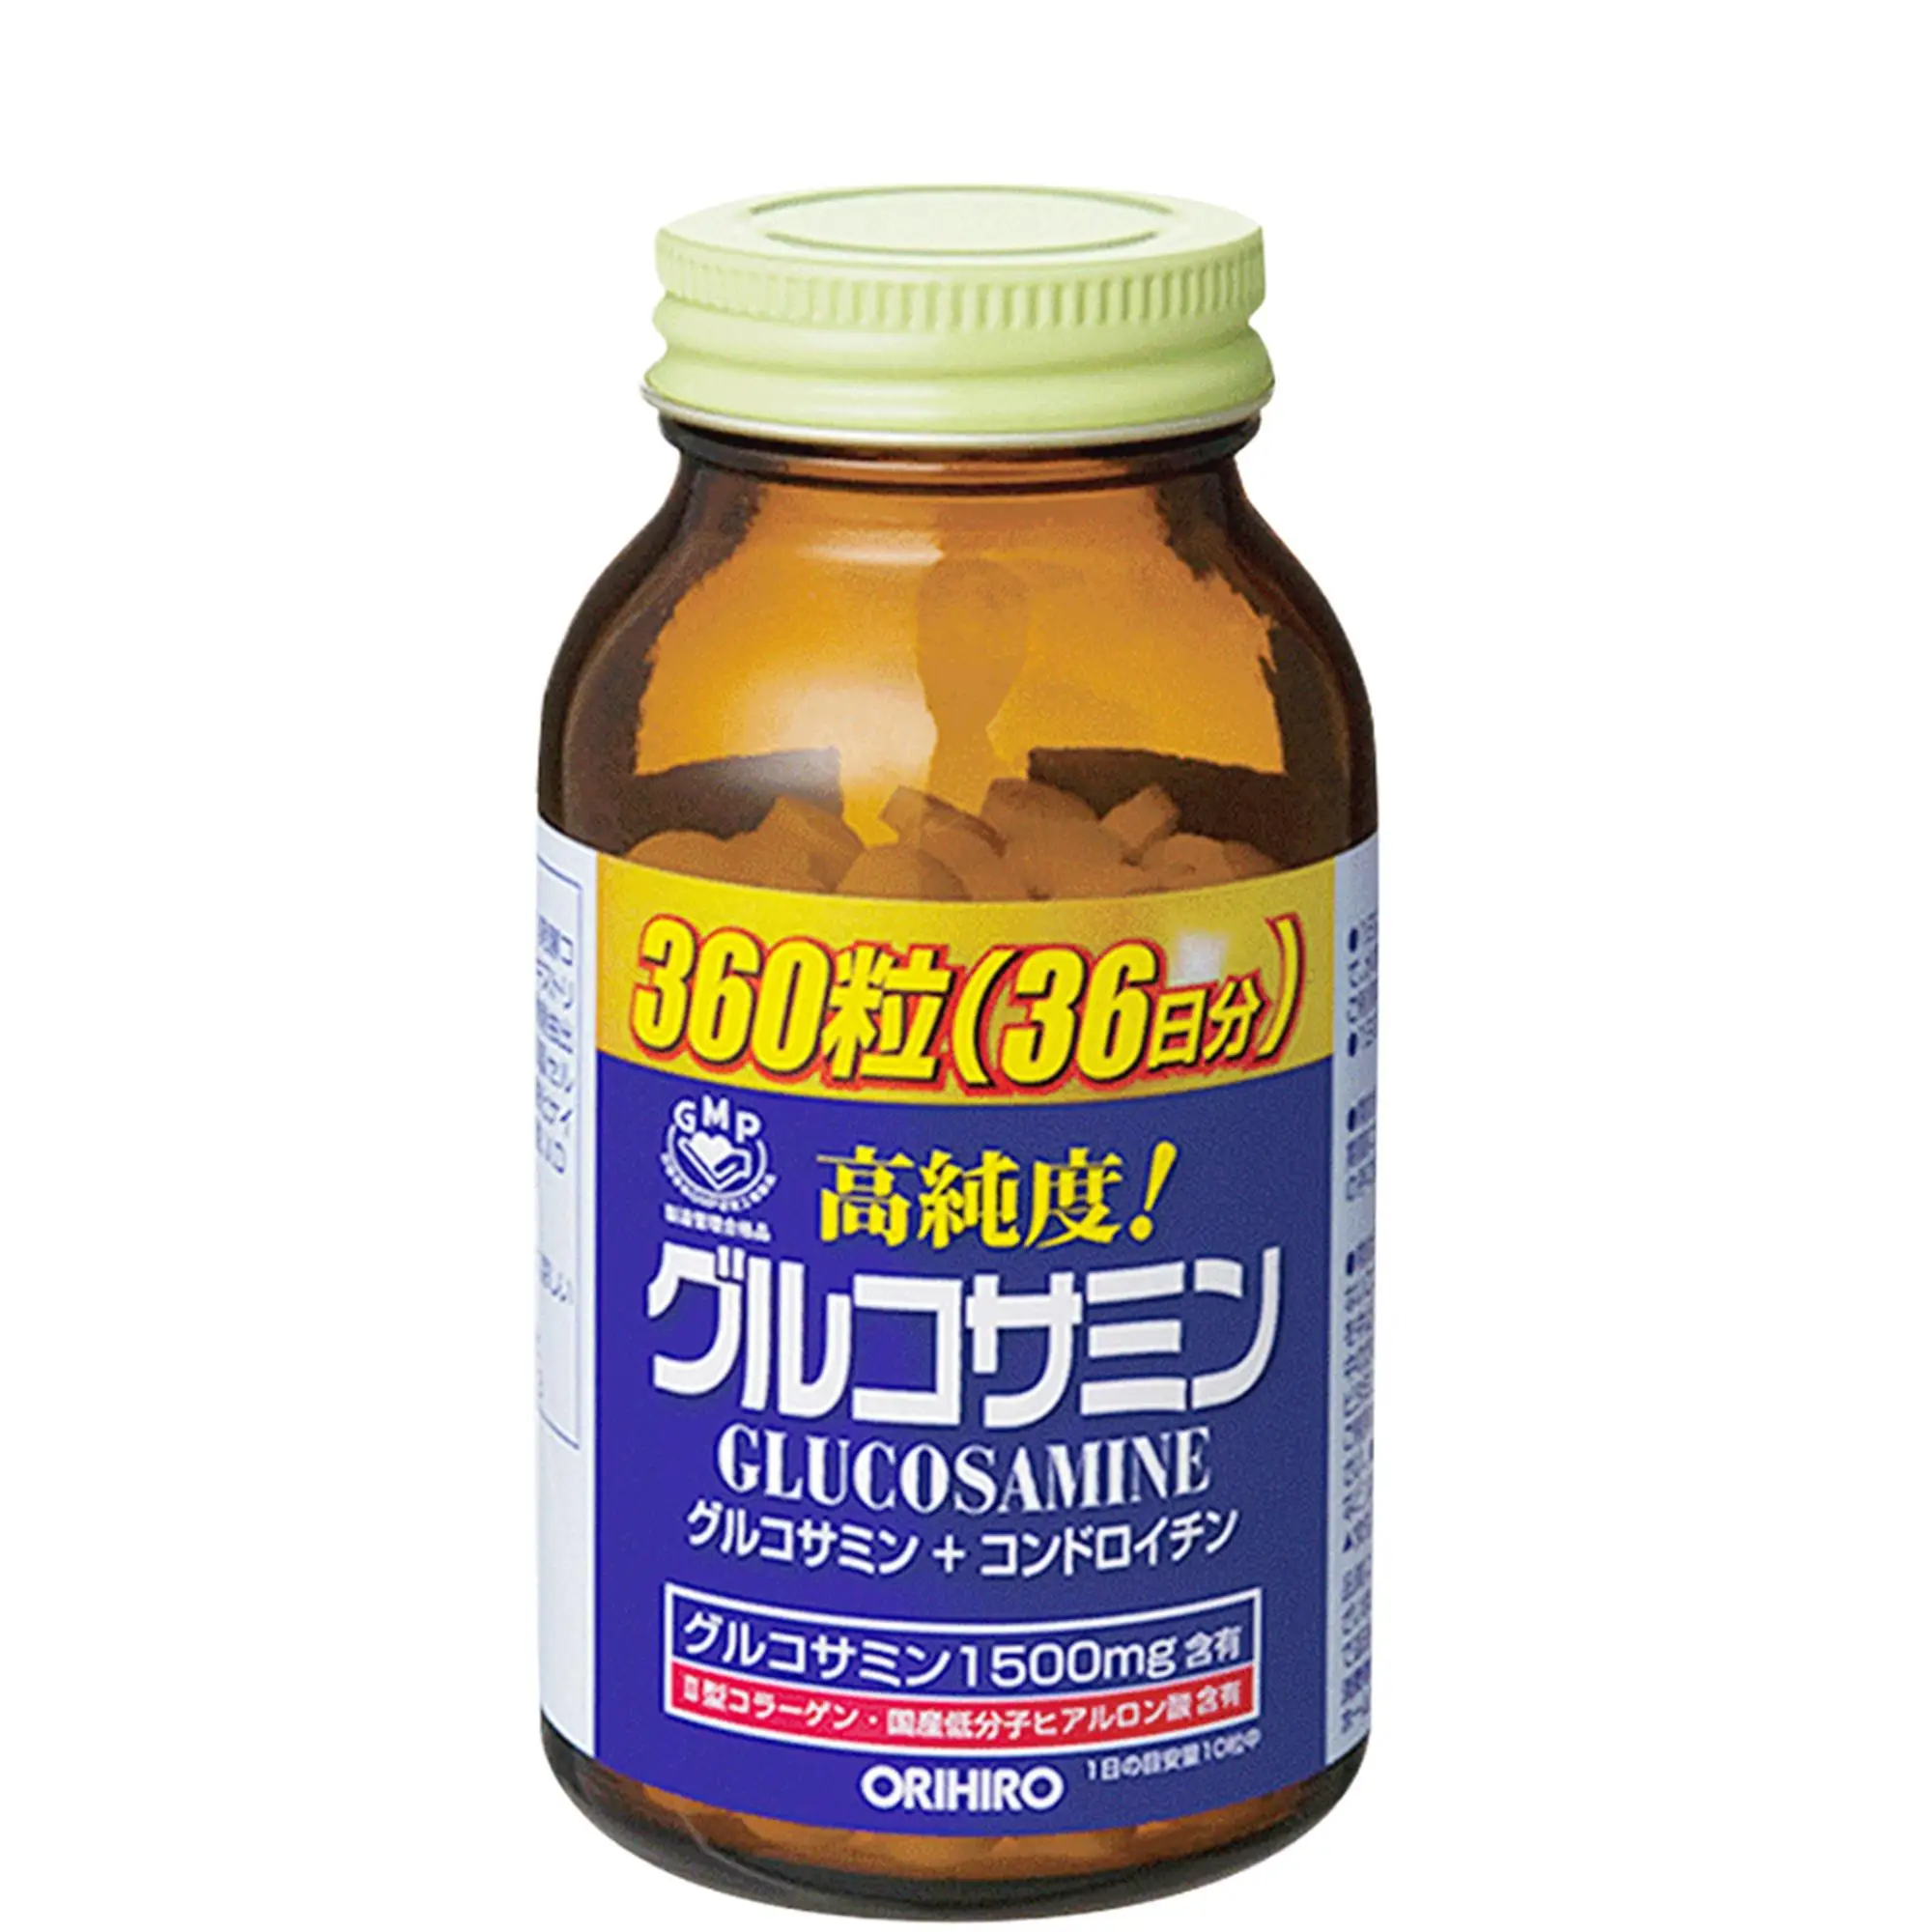 High-purity glucosamine chondroitin repairs joints 360 tablets free shipping